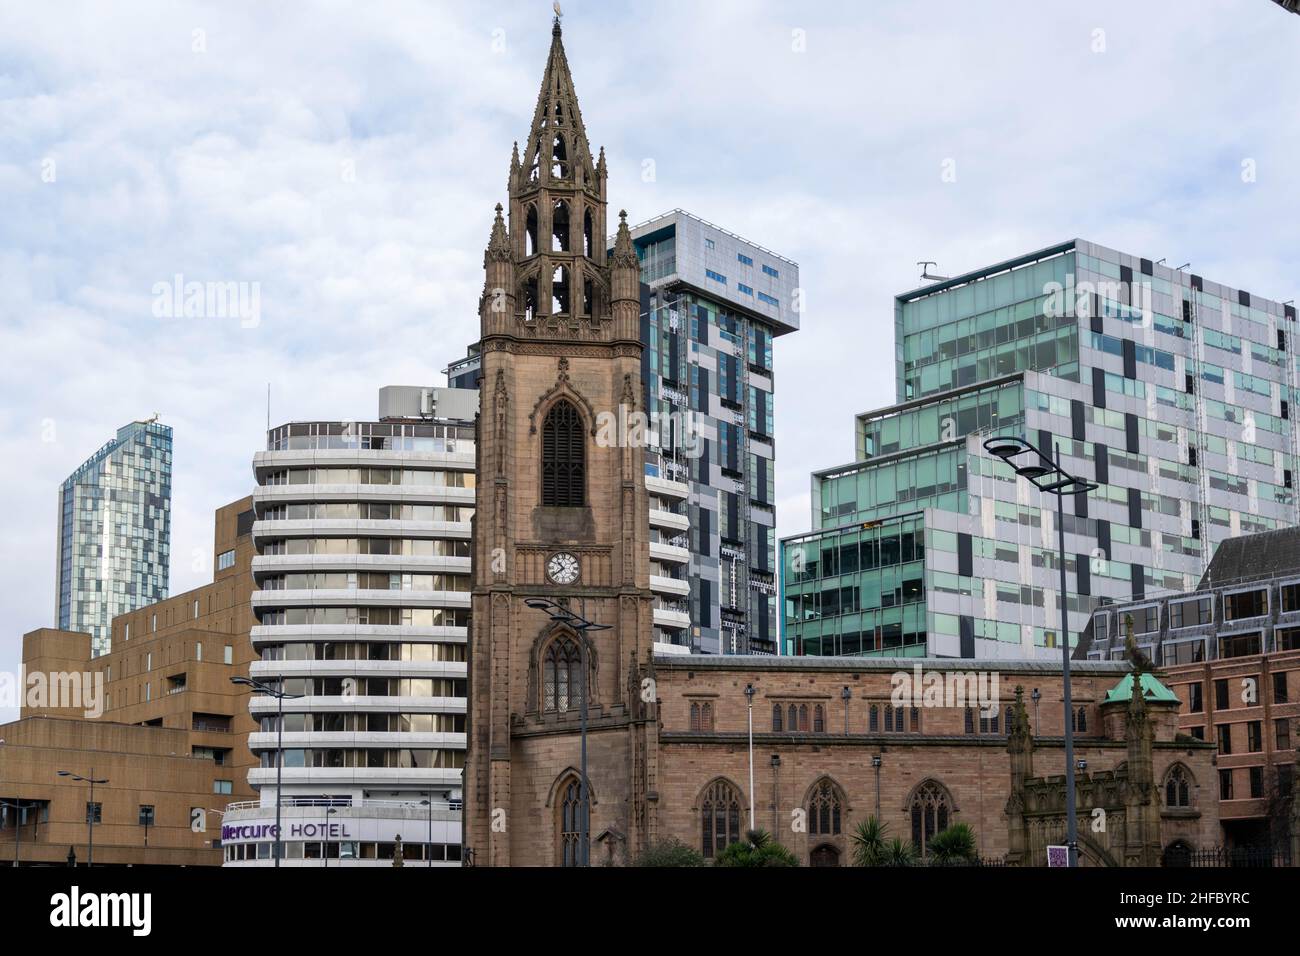 Liverpool, UK - 6 January 2020: The famous Church of St Nicholas, the Anglican parish church of Liverpool. Cityscape in city centre Liverpool near Alb Stock Photo